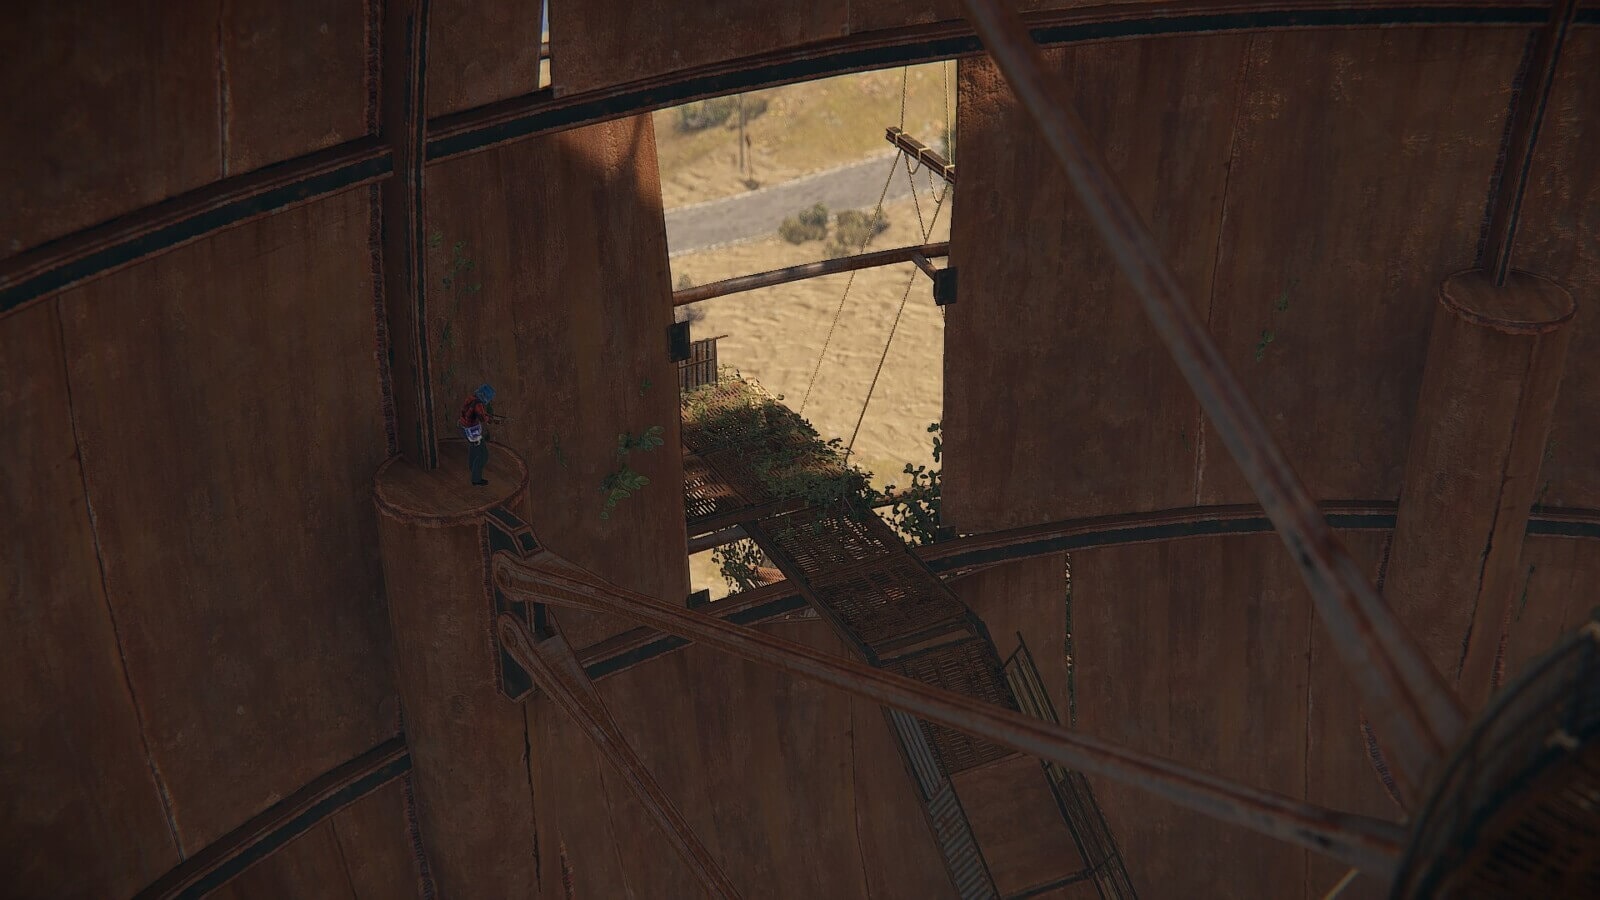 You can climb on the beams inside of the Sphere Tank (Dome) monument to get into some very sneaky locations. Being mindful of these will help if you encounter anyone camping at this monument.